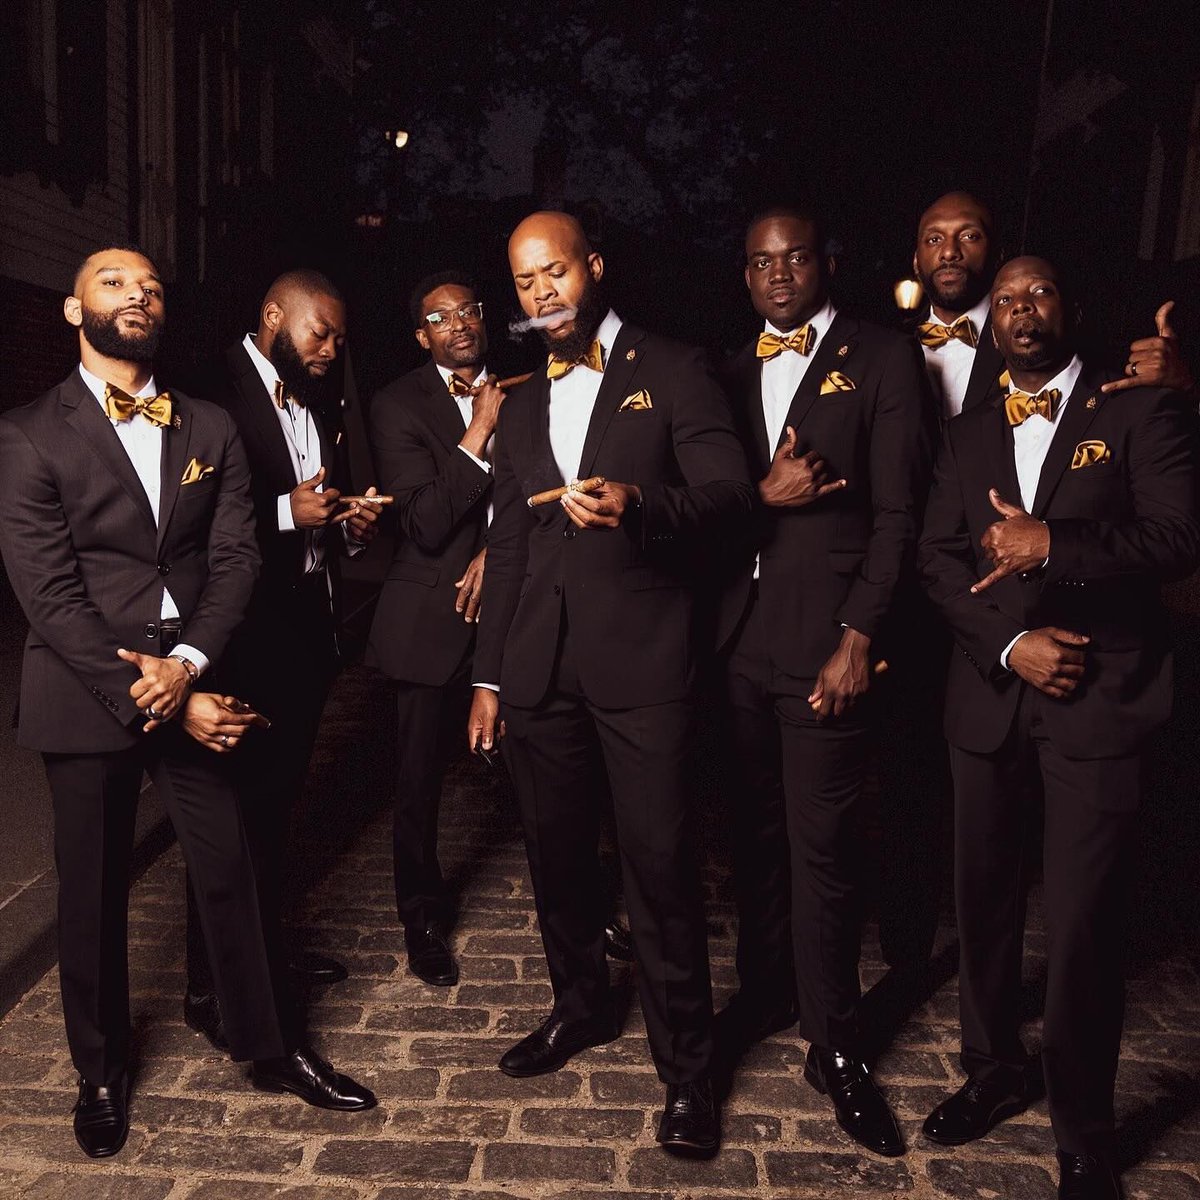 The Alphas in Harlem just crossed their Spring 2024 line. Let’s all show these ICE COLD brothers some love. @harlemalphas125 📸: @morencystudios